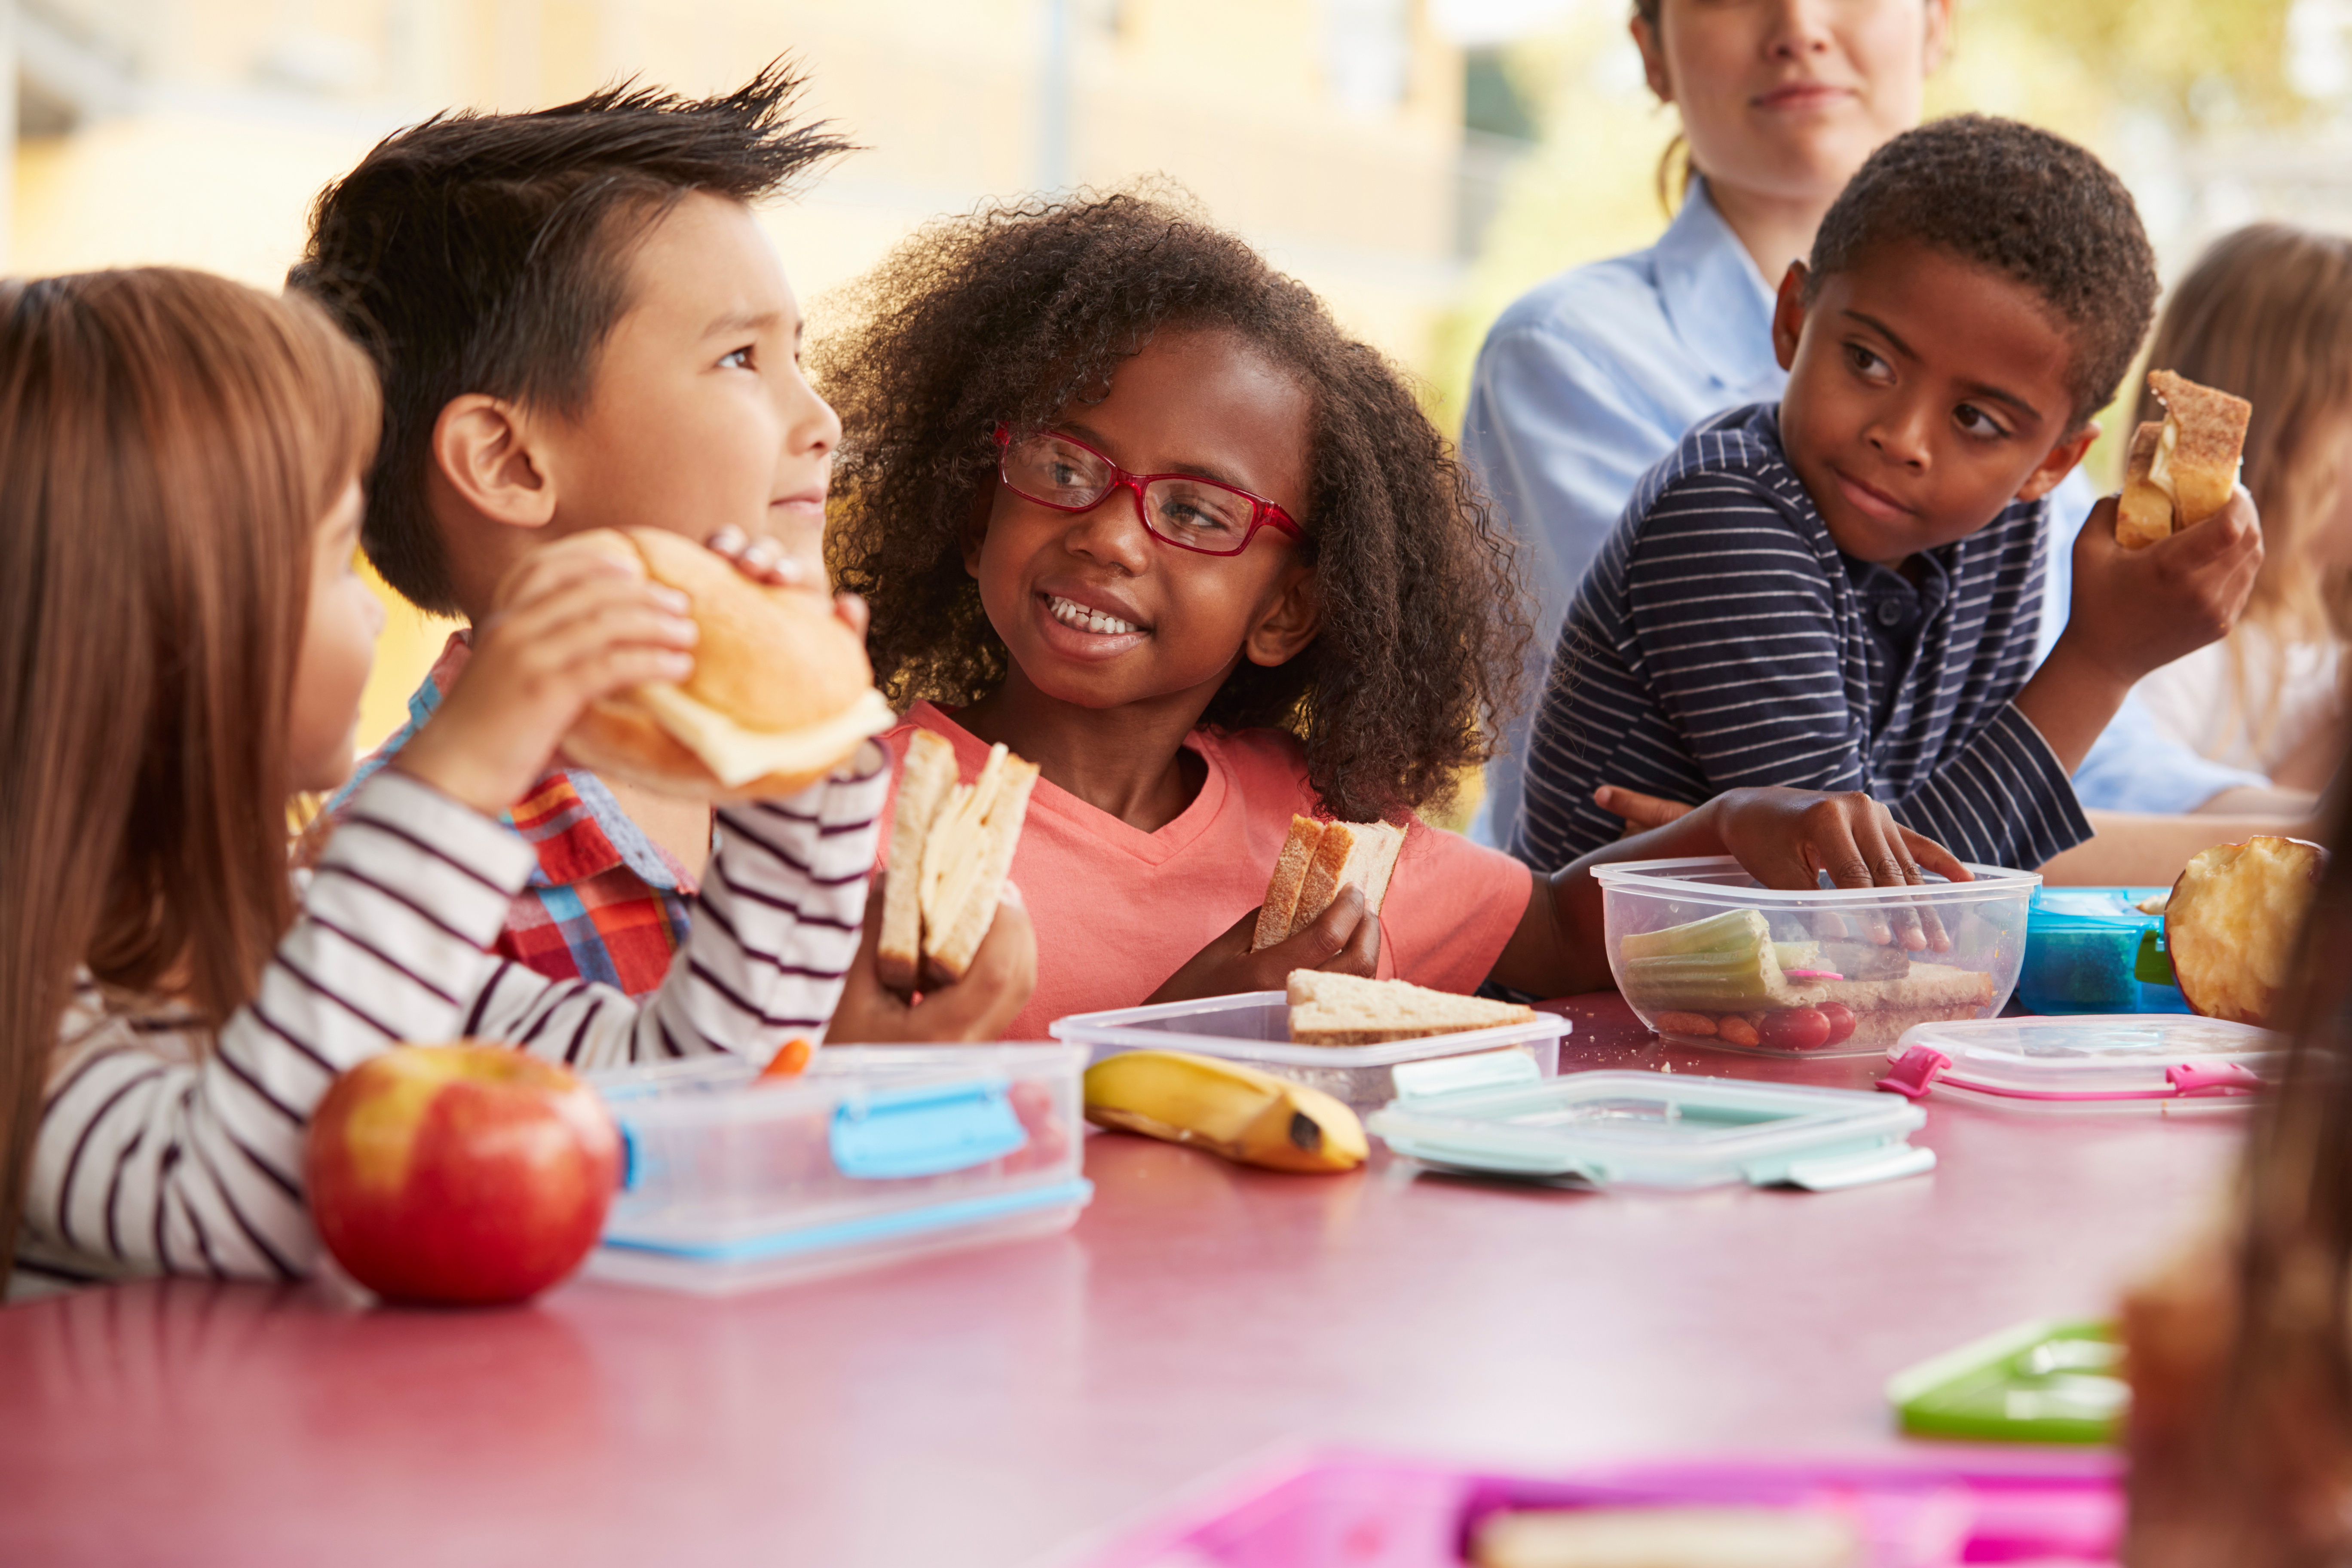 Universal Free Meals in NYC Schools